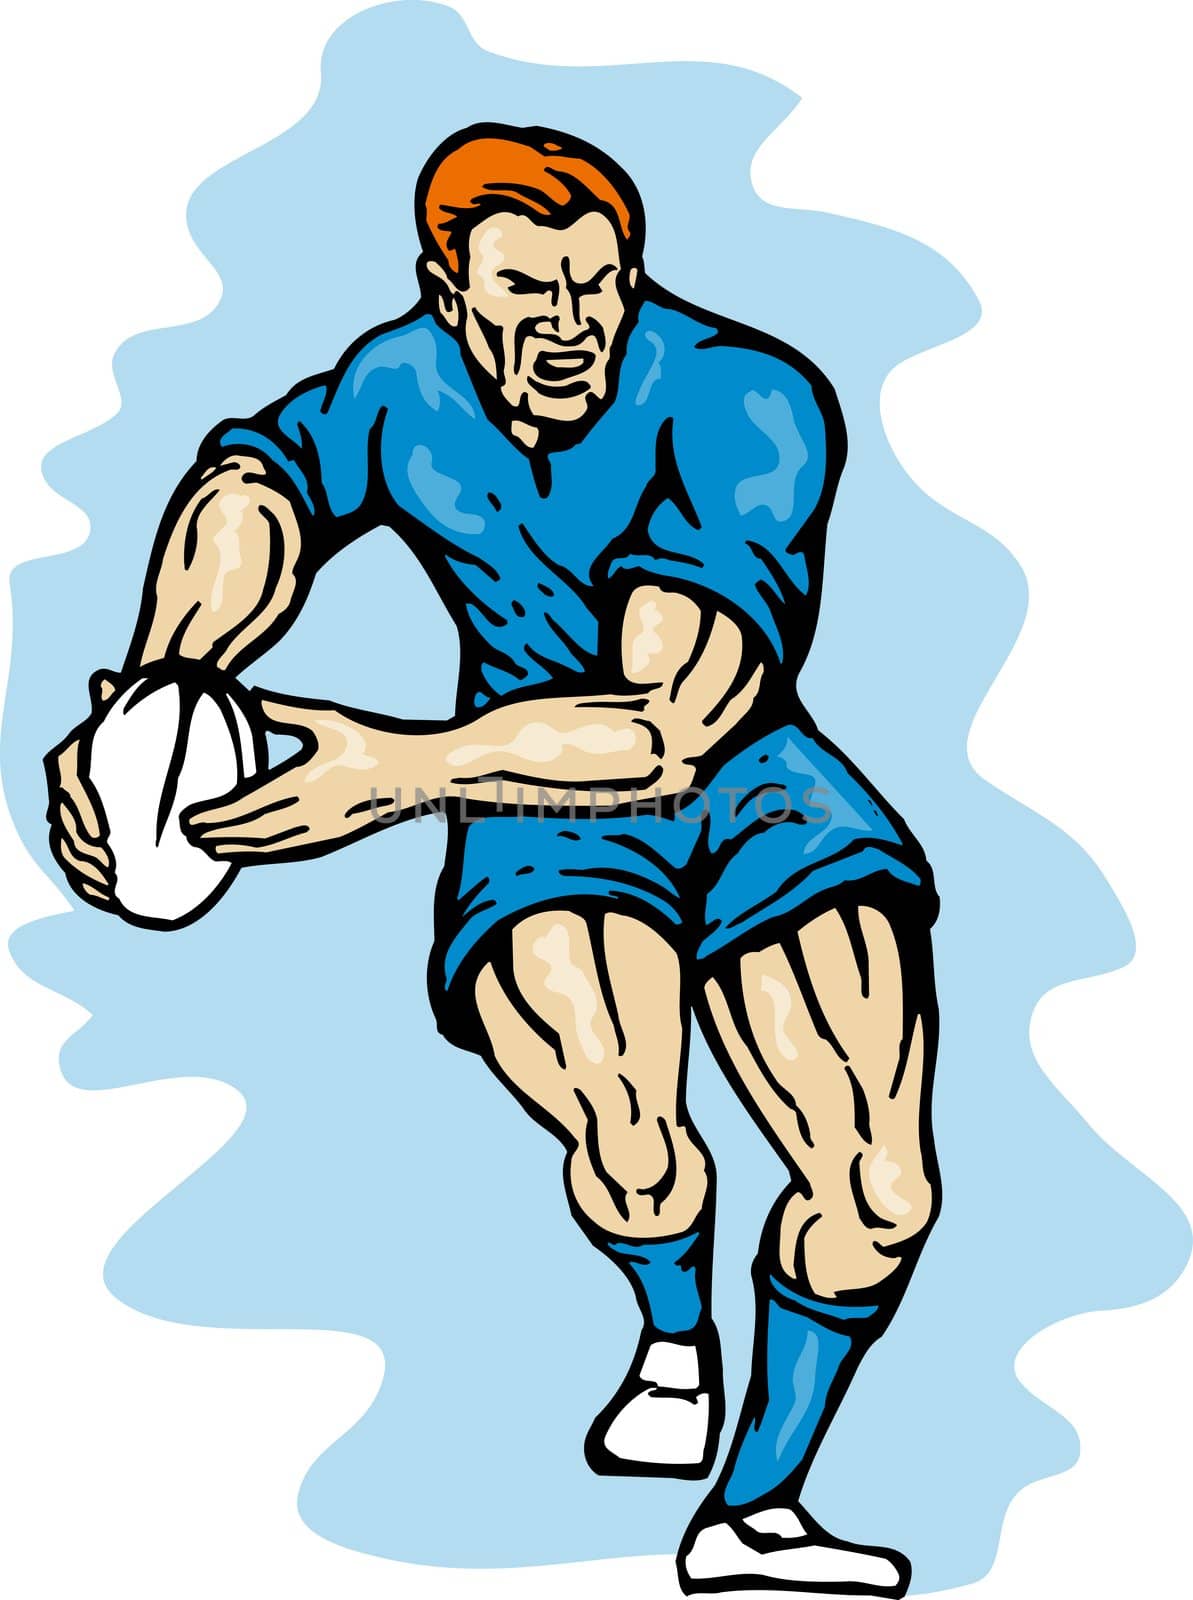 illustration of a rugby player running passing the ball on isolated background 